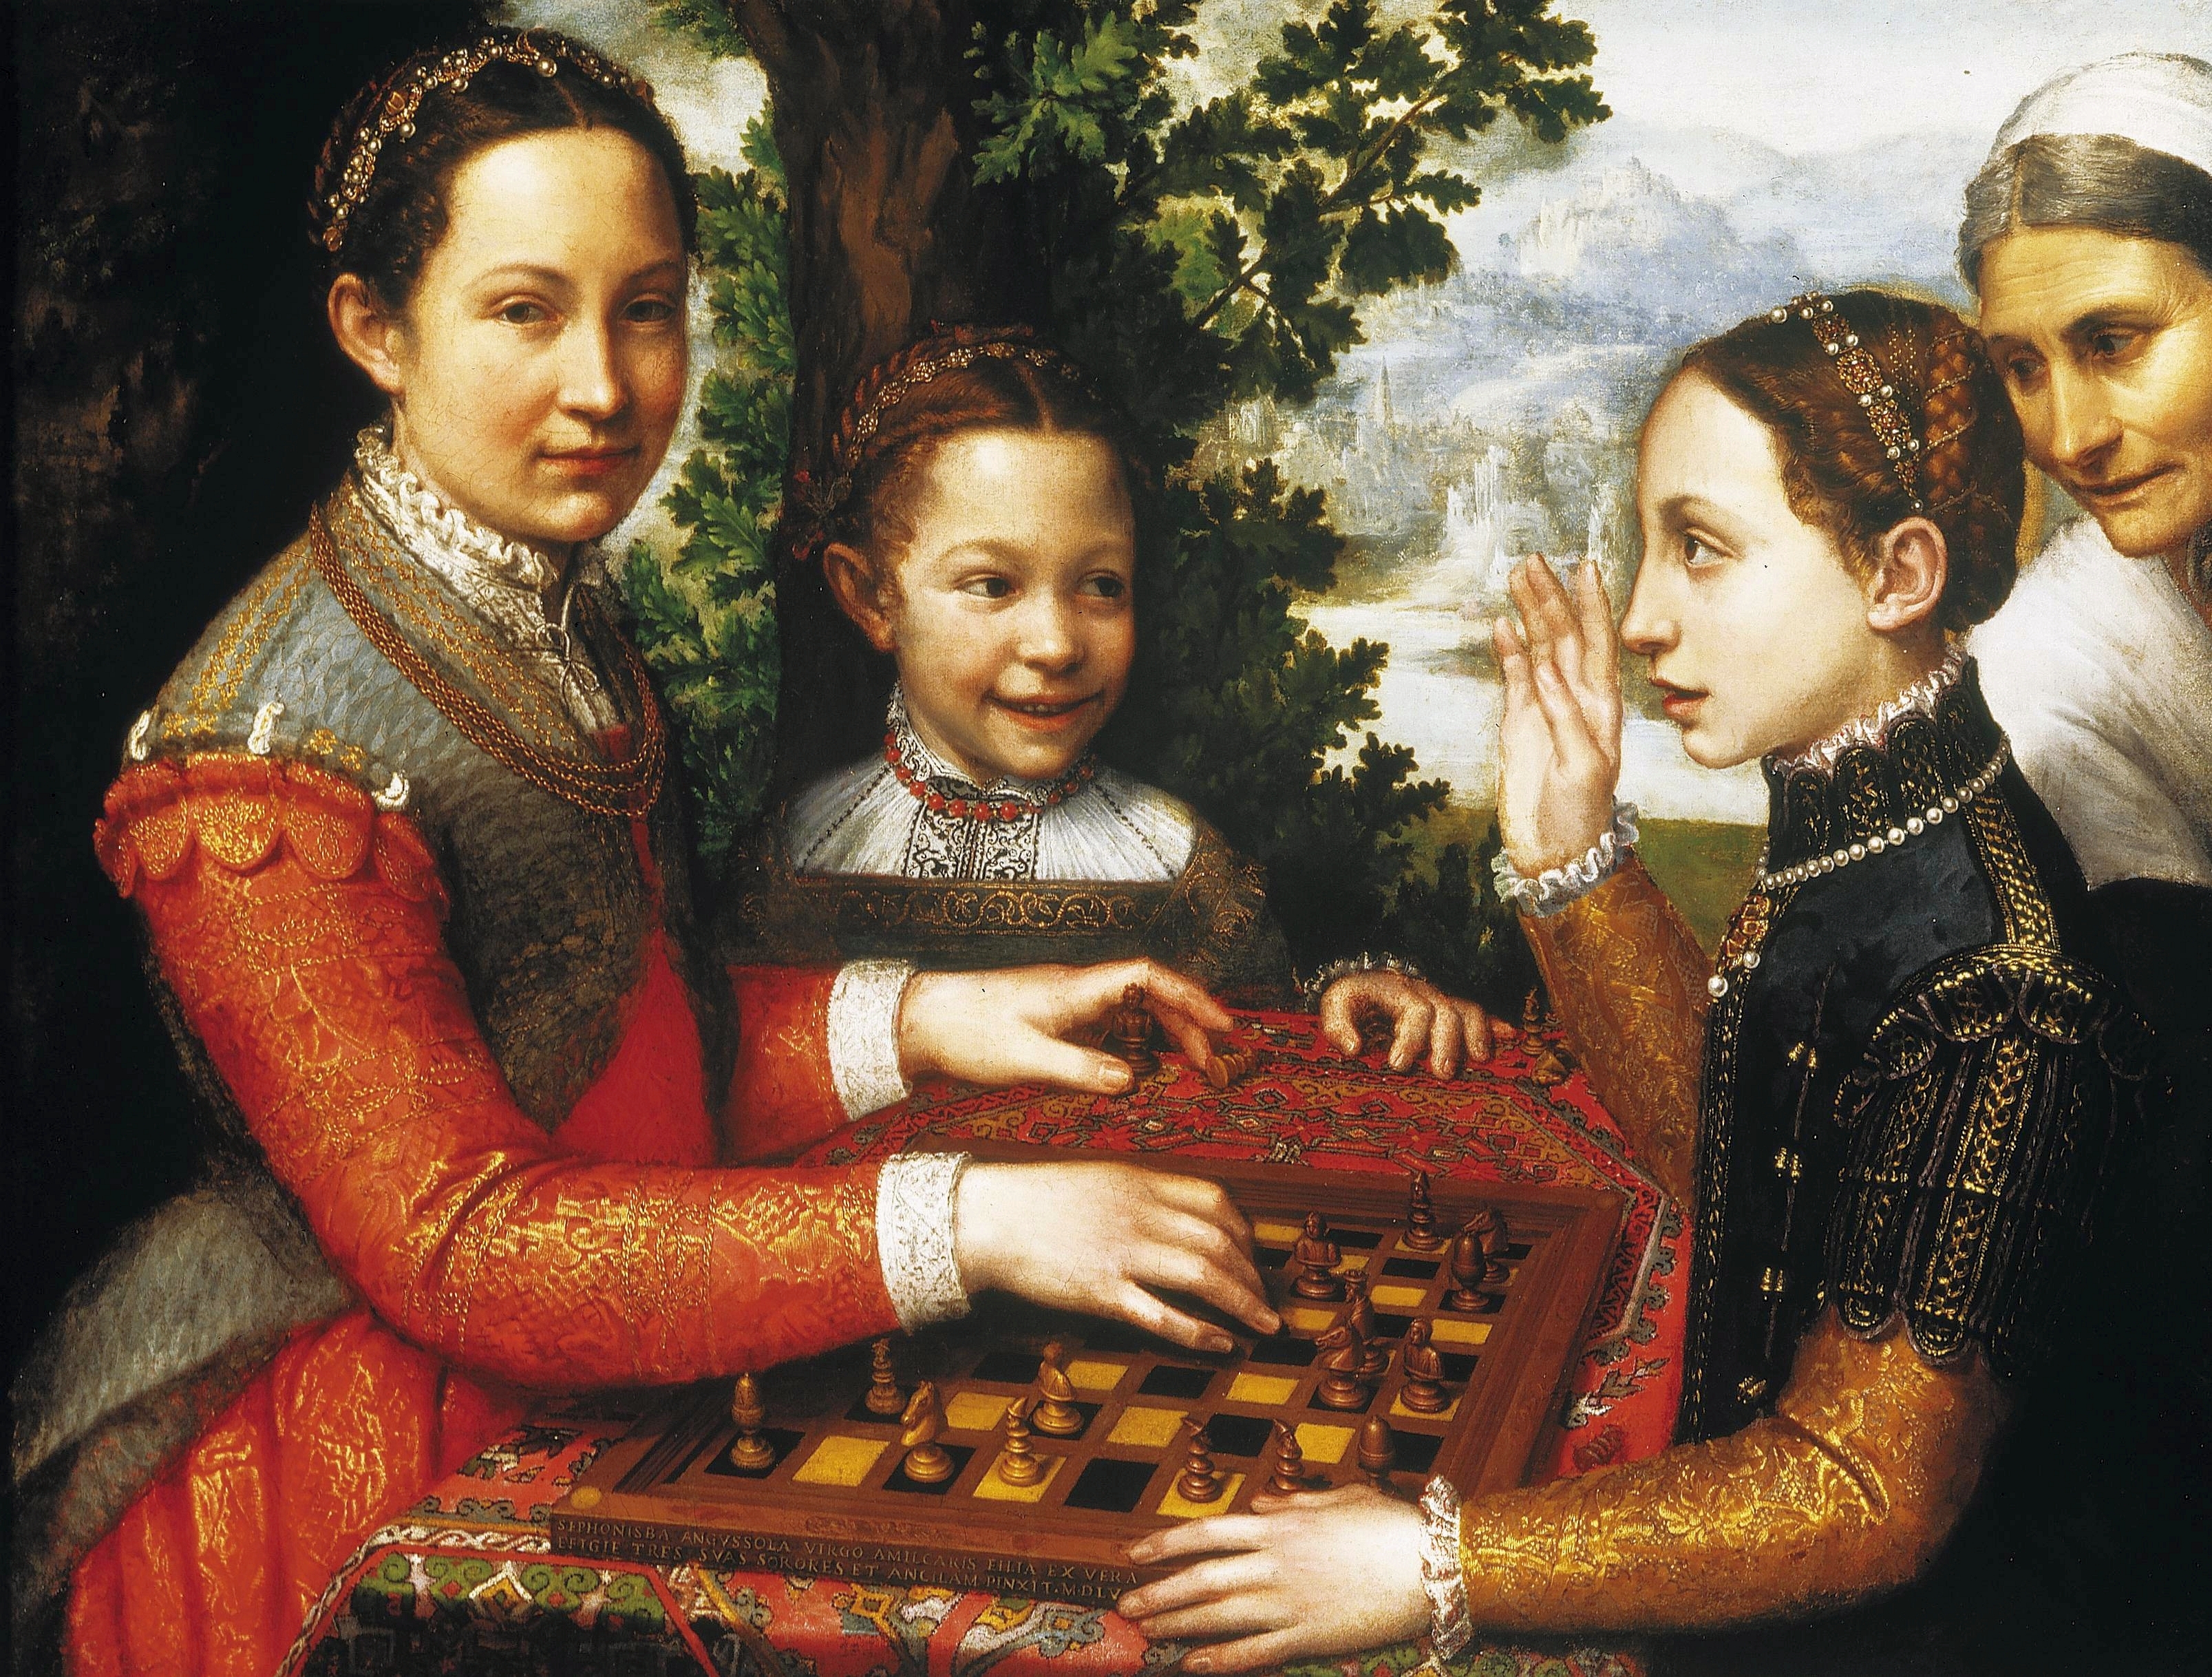 Two young women are playing chess, while a young girl stands next to them and smiles at the younger of the players. The older player looks directly at the viewer, with her hand on a chess piece. There is a tree and a city in the background and an older man looks over at the group and their game from the right side of the canvas.